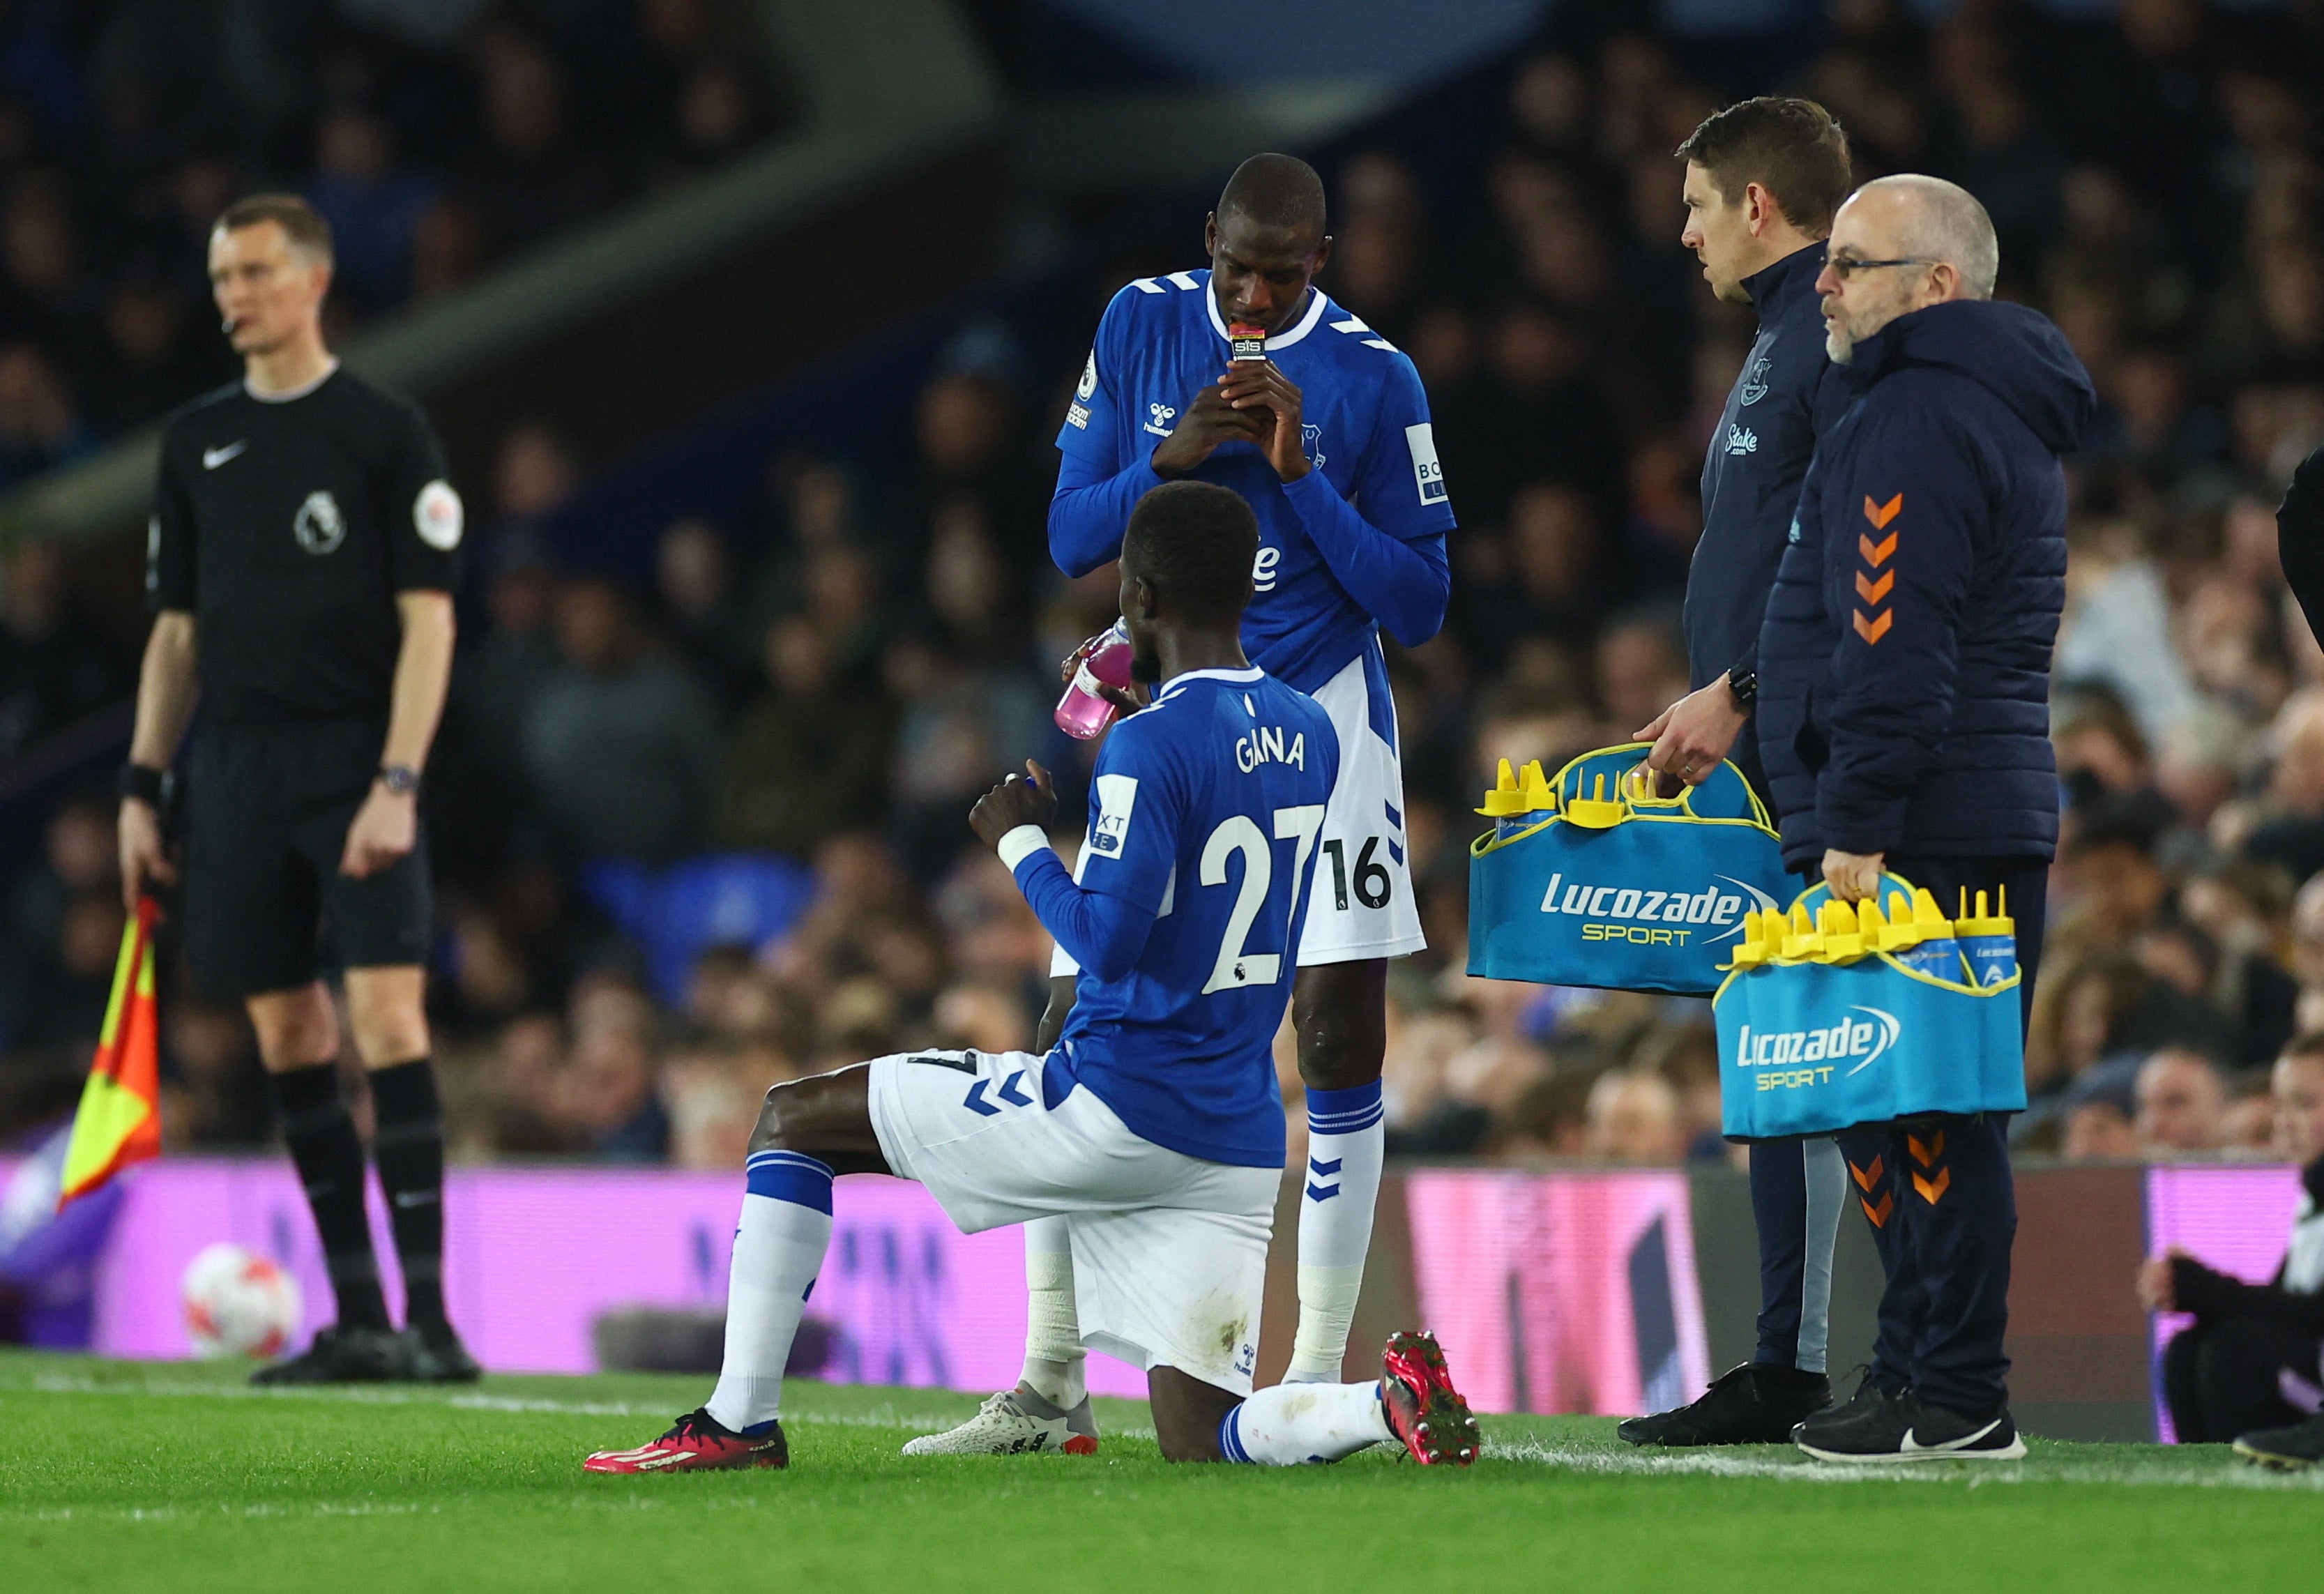 Everton’s Idrissa Gueye and Abdoulaye Doucoure broke their fast against Tottenham